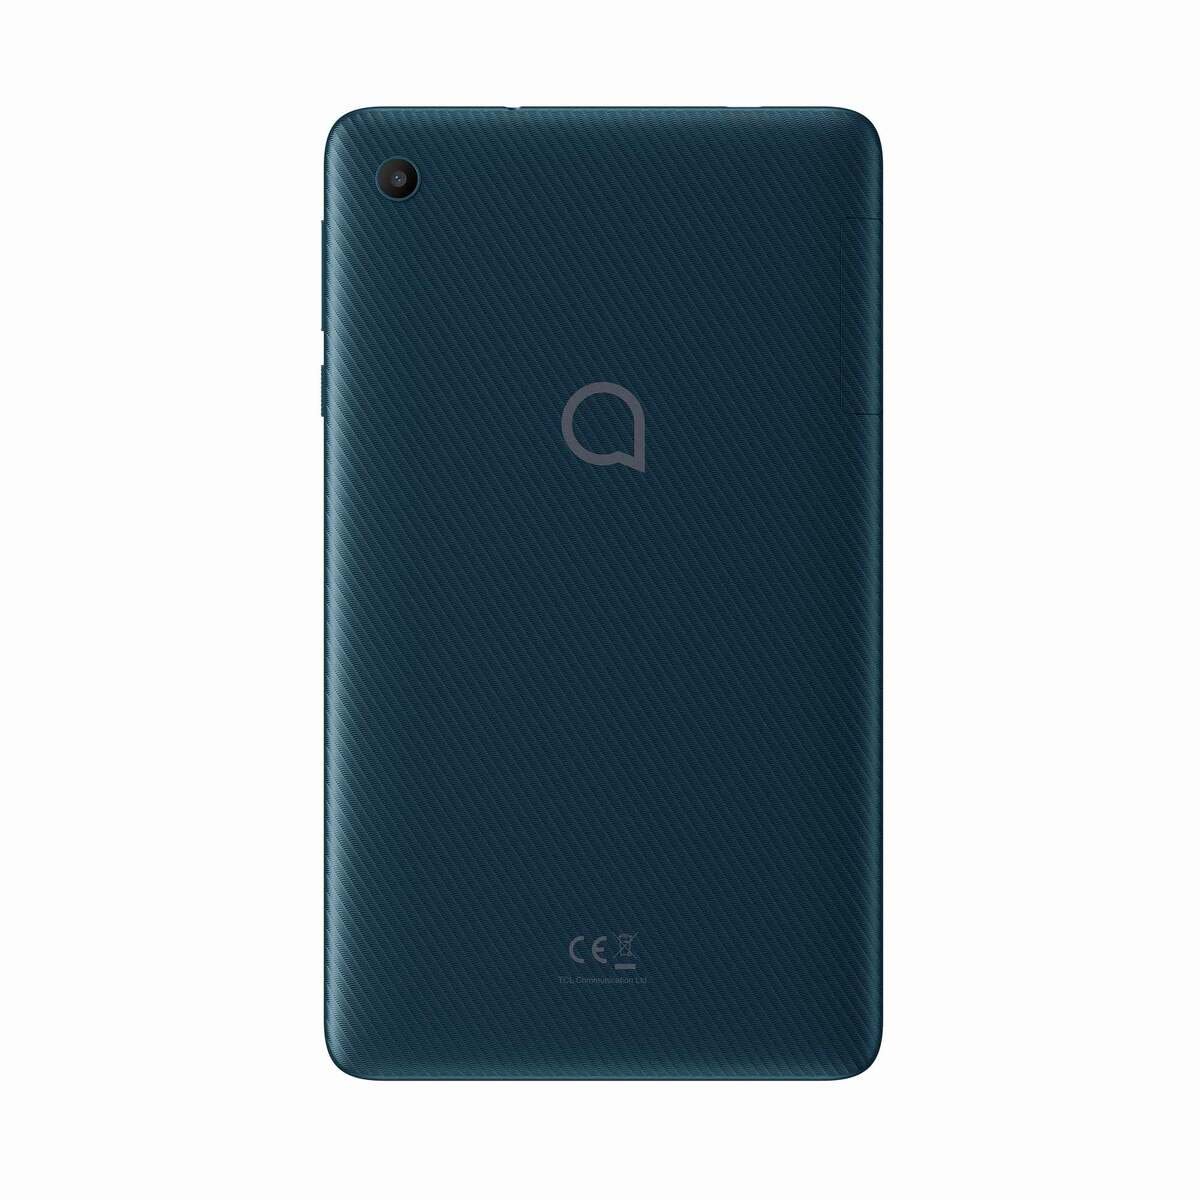 Alcatel Tablet 1T 7 9013T, 4G, Quad-core, 1GB RAM, 16GB Memory, 7 inches Display, Android, Agate Green